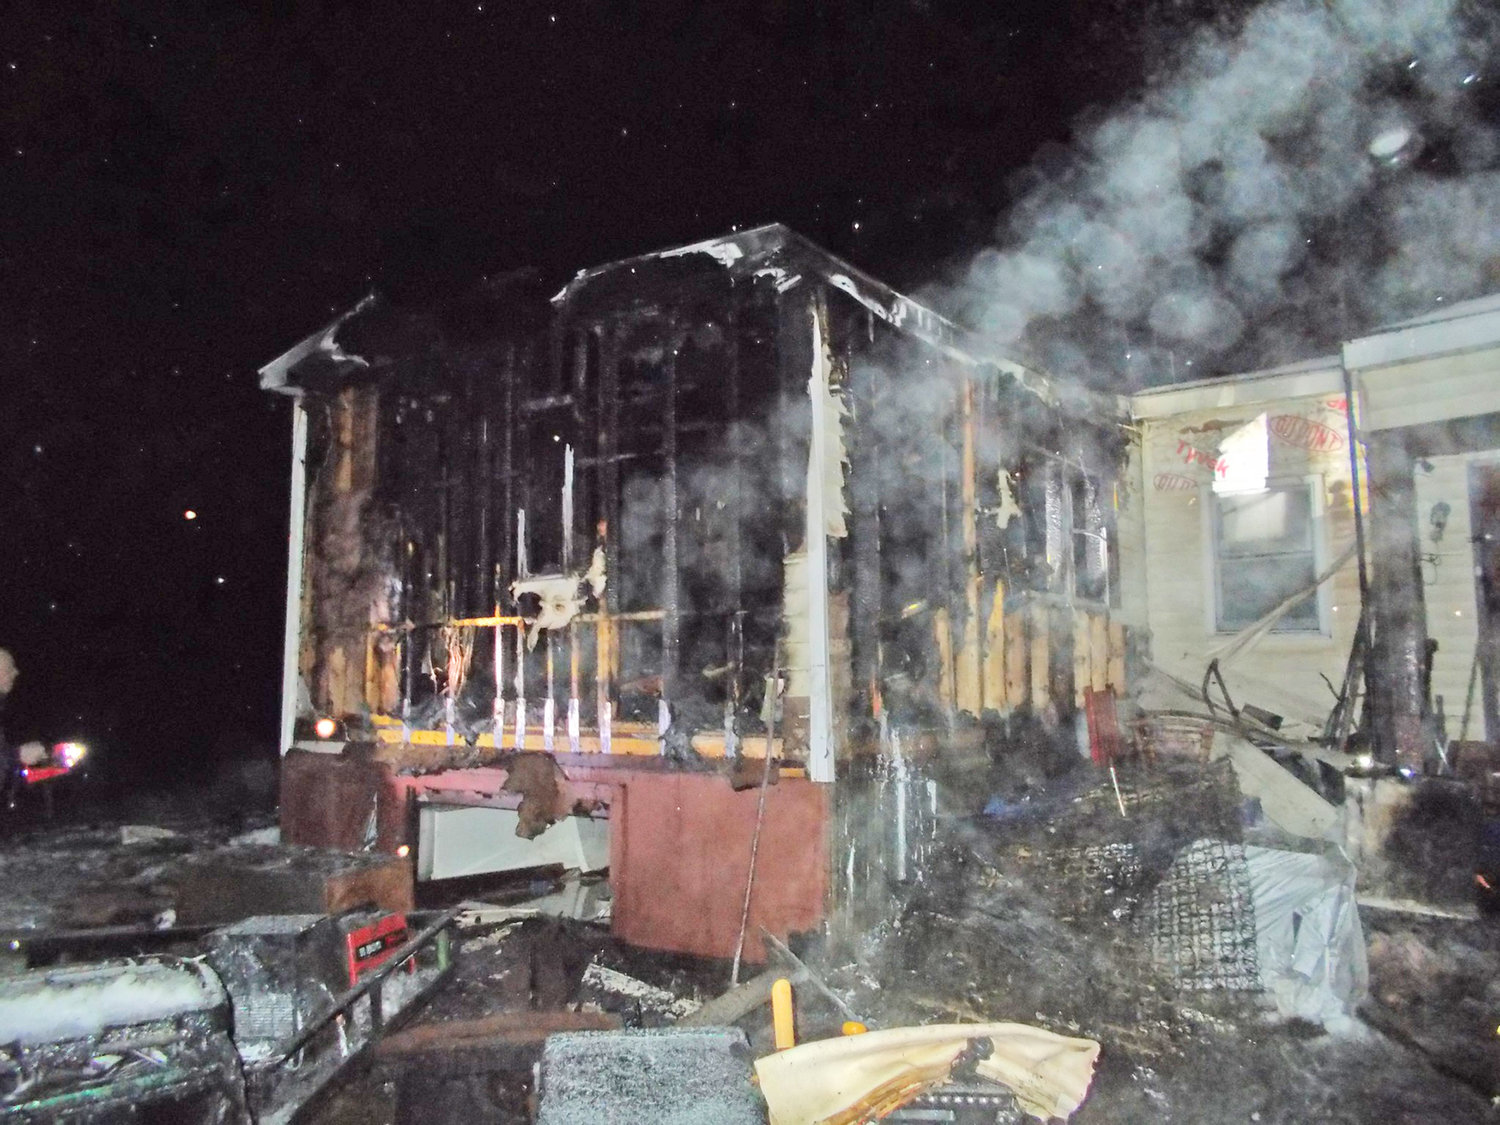 A mobile home on Route 26 in Ava was heavily damaged by fire Monday evening.